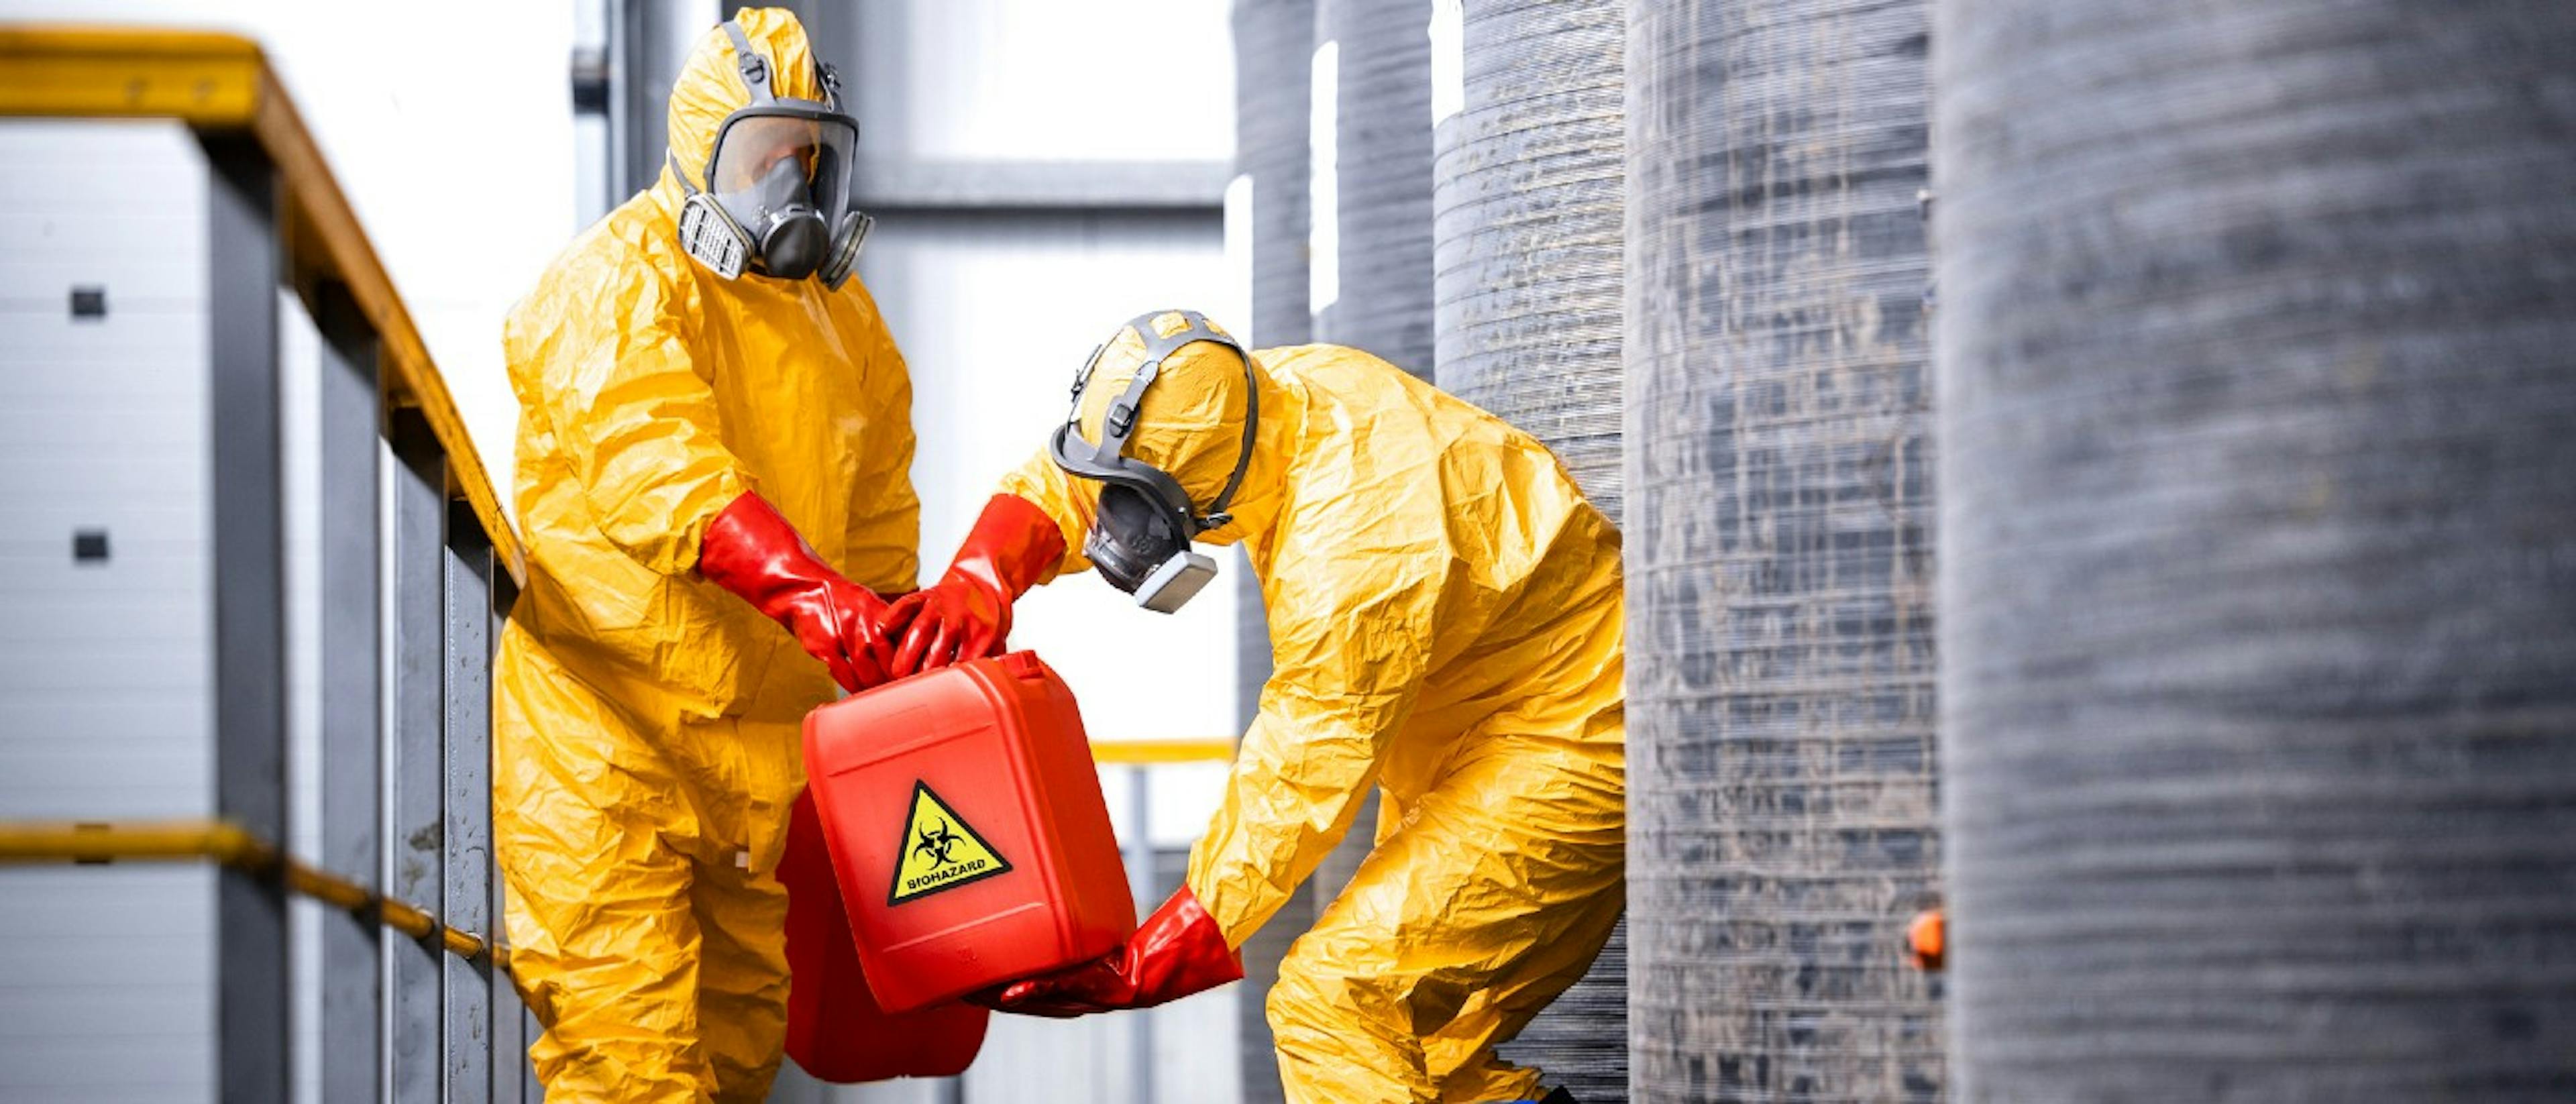 featured image - The Role of AI in Hazmat Response